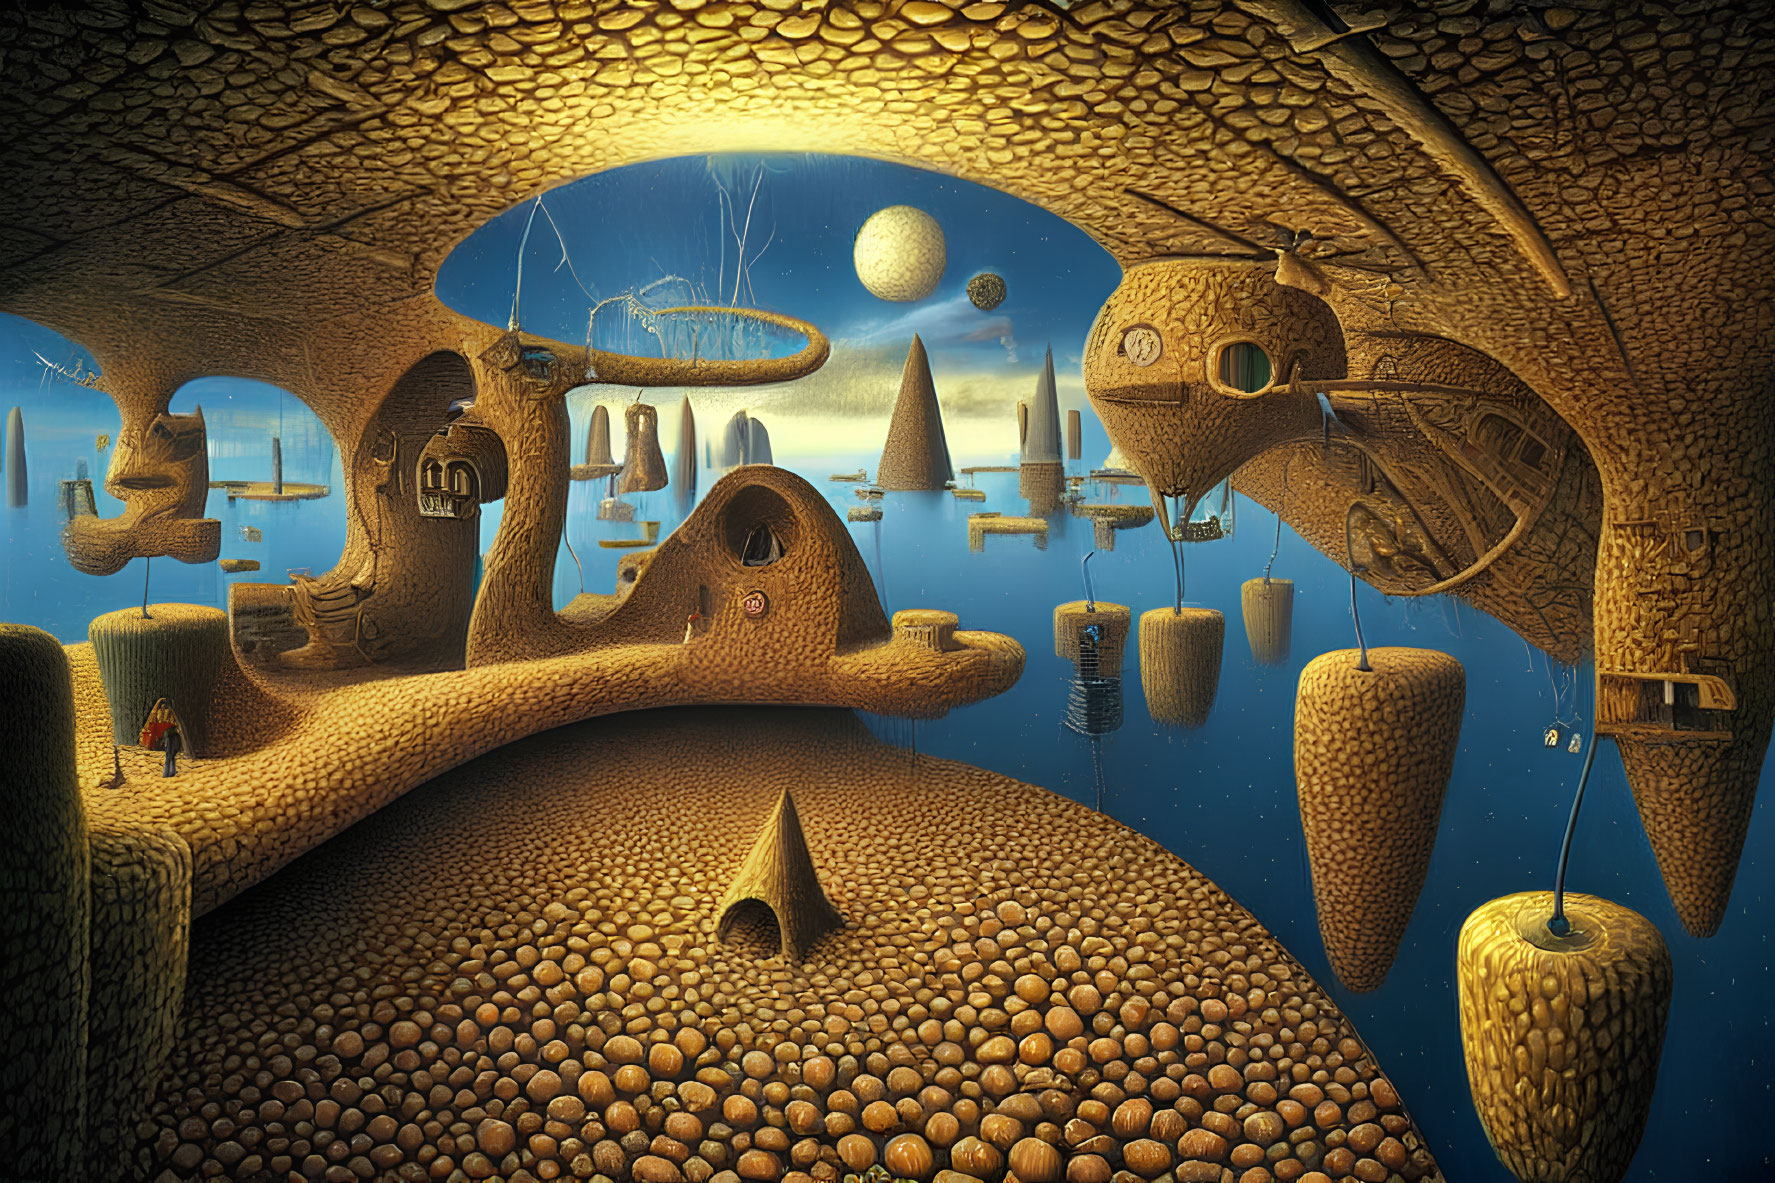 Surreal landscape with floating islands and cobblestone ground